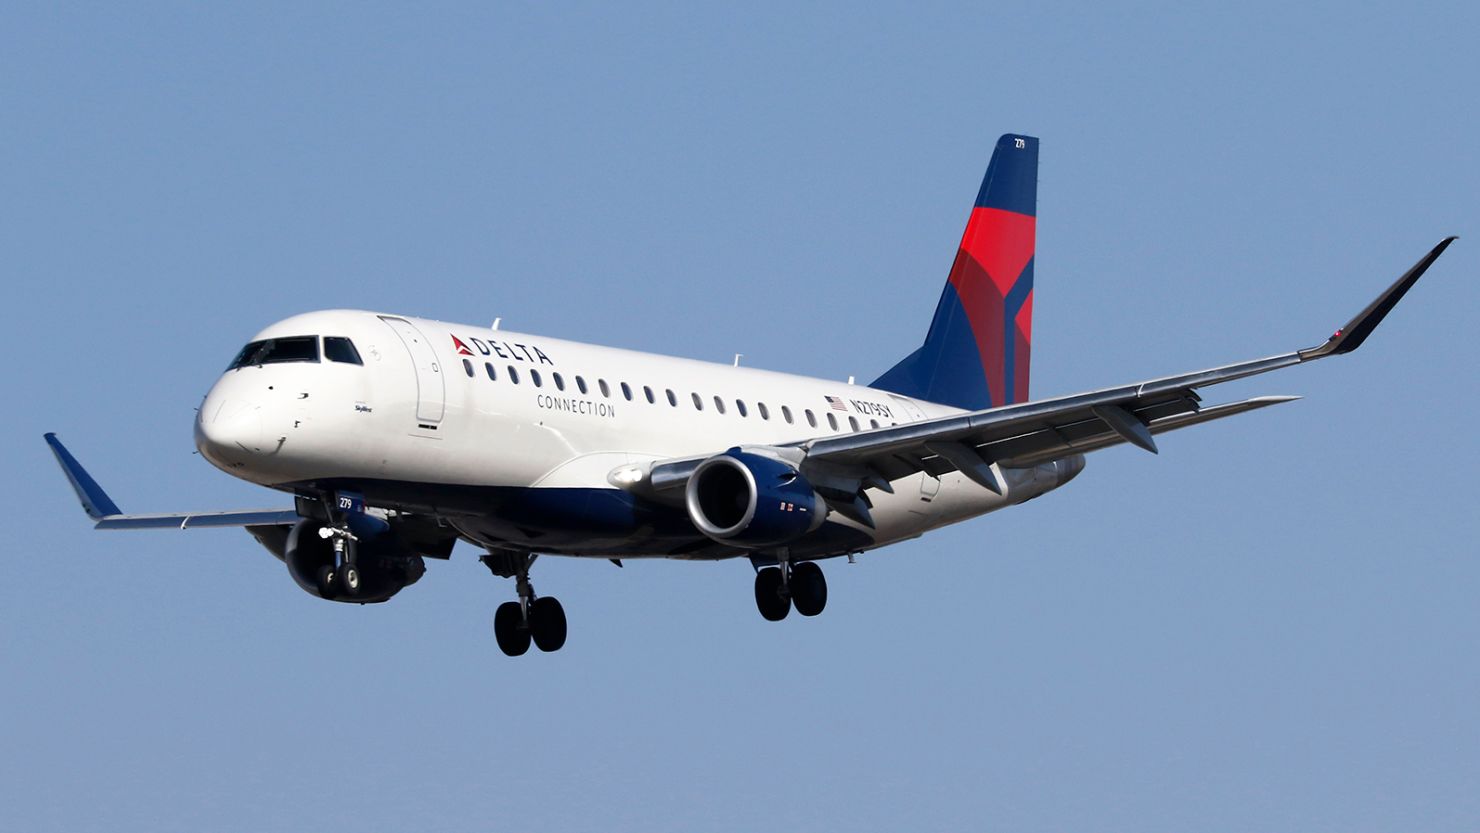 Delta Airlines: 11 people taken to a hospital after 'severe turbulence' on  flight before landing in Atlanta, airline says